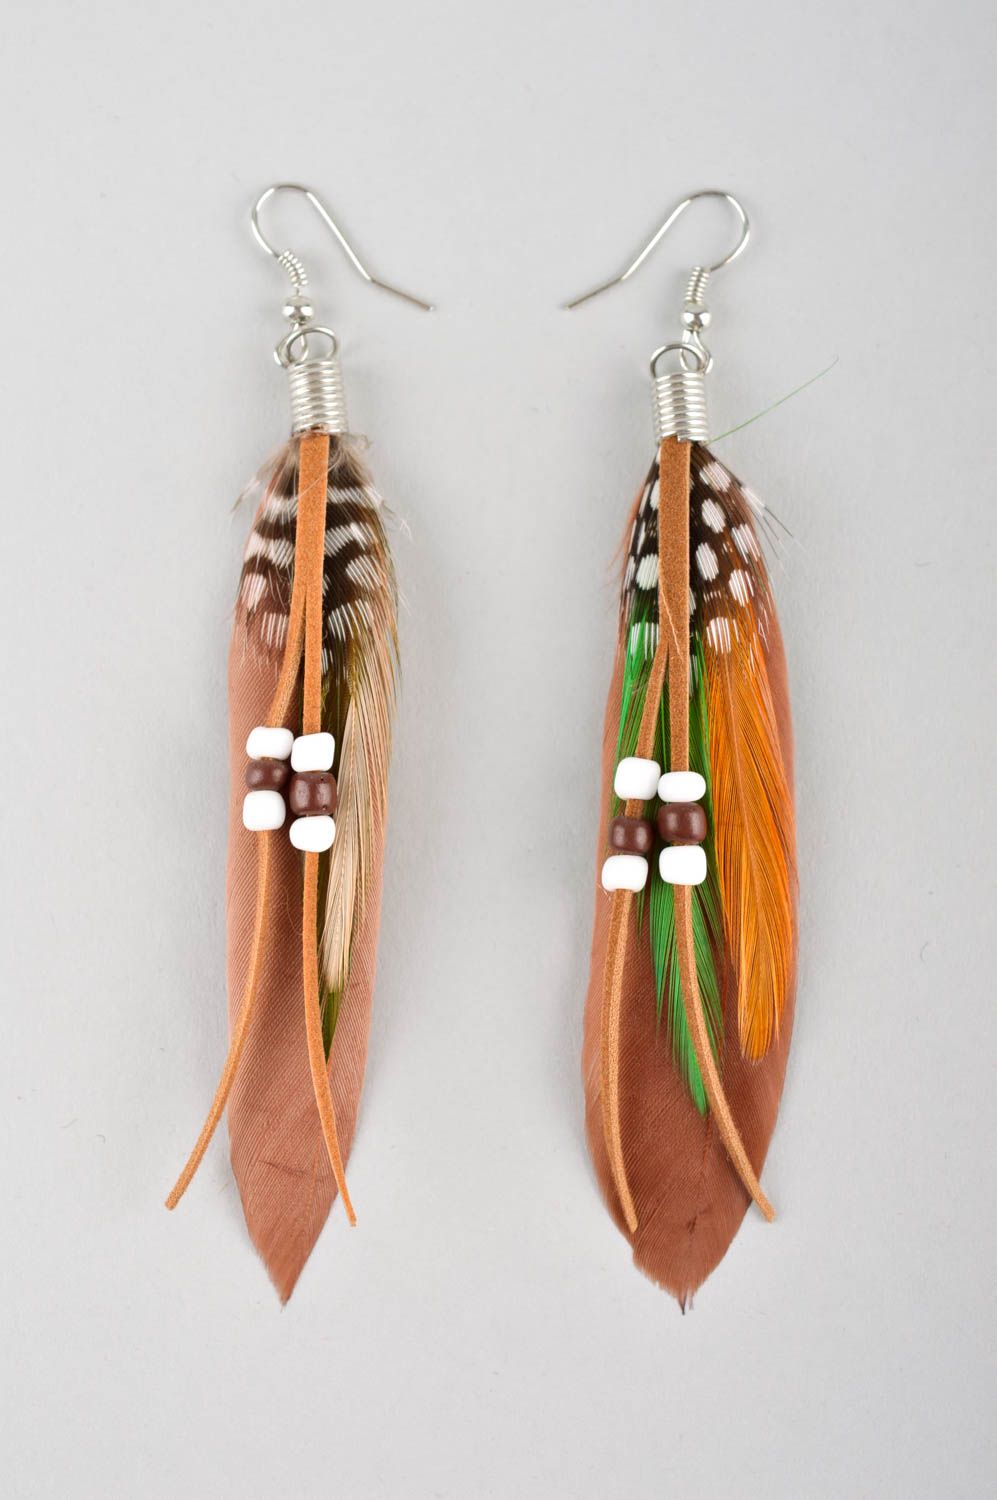 Handmade earrings with charms feather earrings long earrings designer accessory photo 3